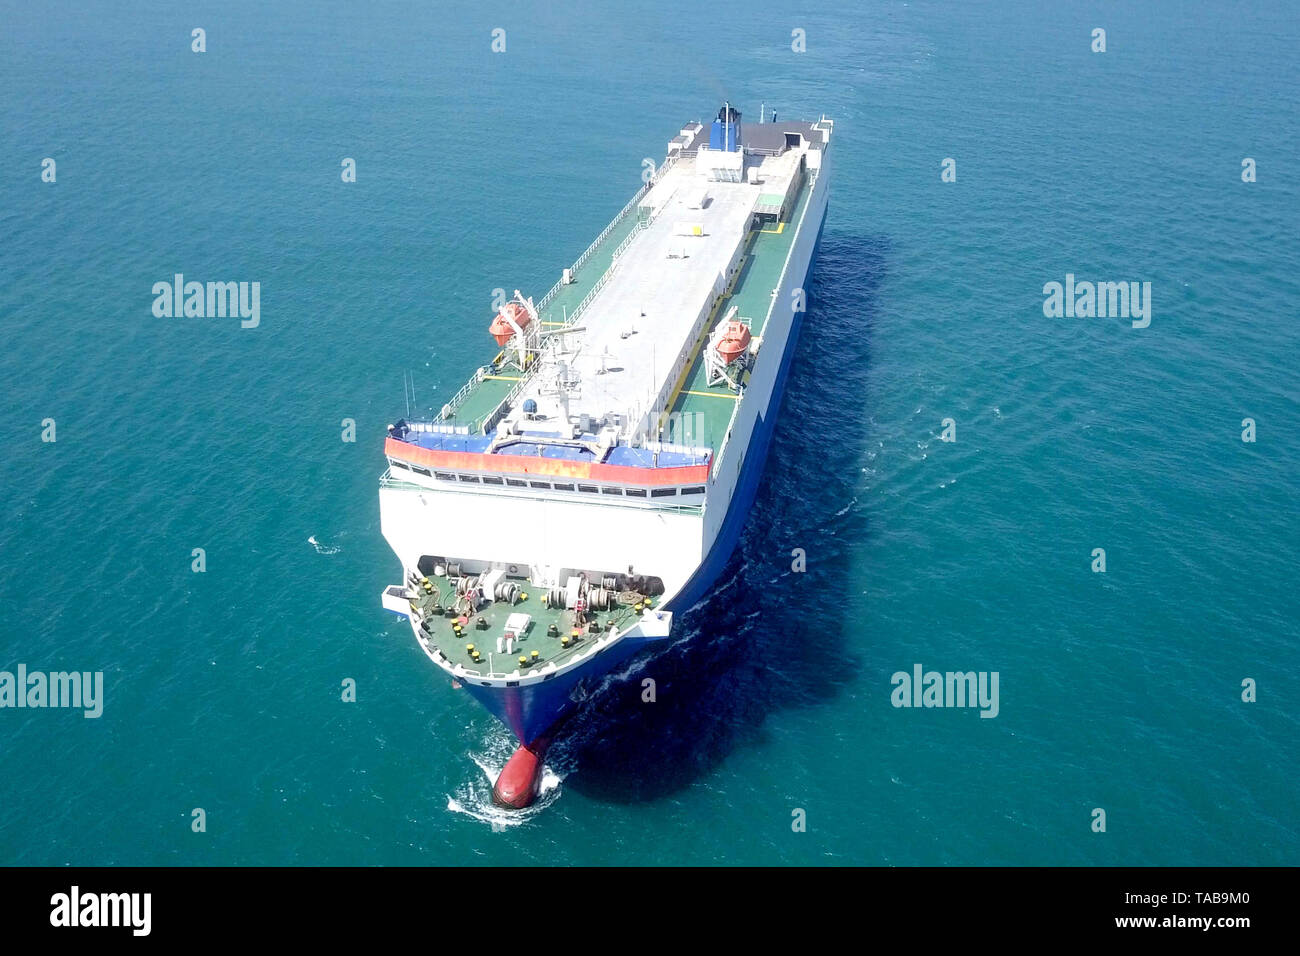 Aerial image of a Large RoRo (Roll on/off) Vehicle carrier vessel cruising the Mediterranean sea Stock Photo